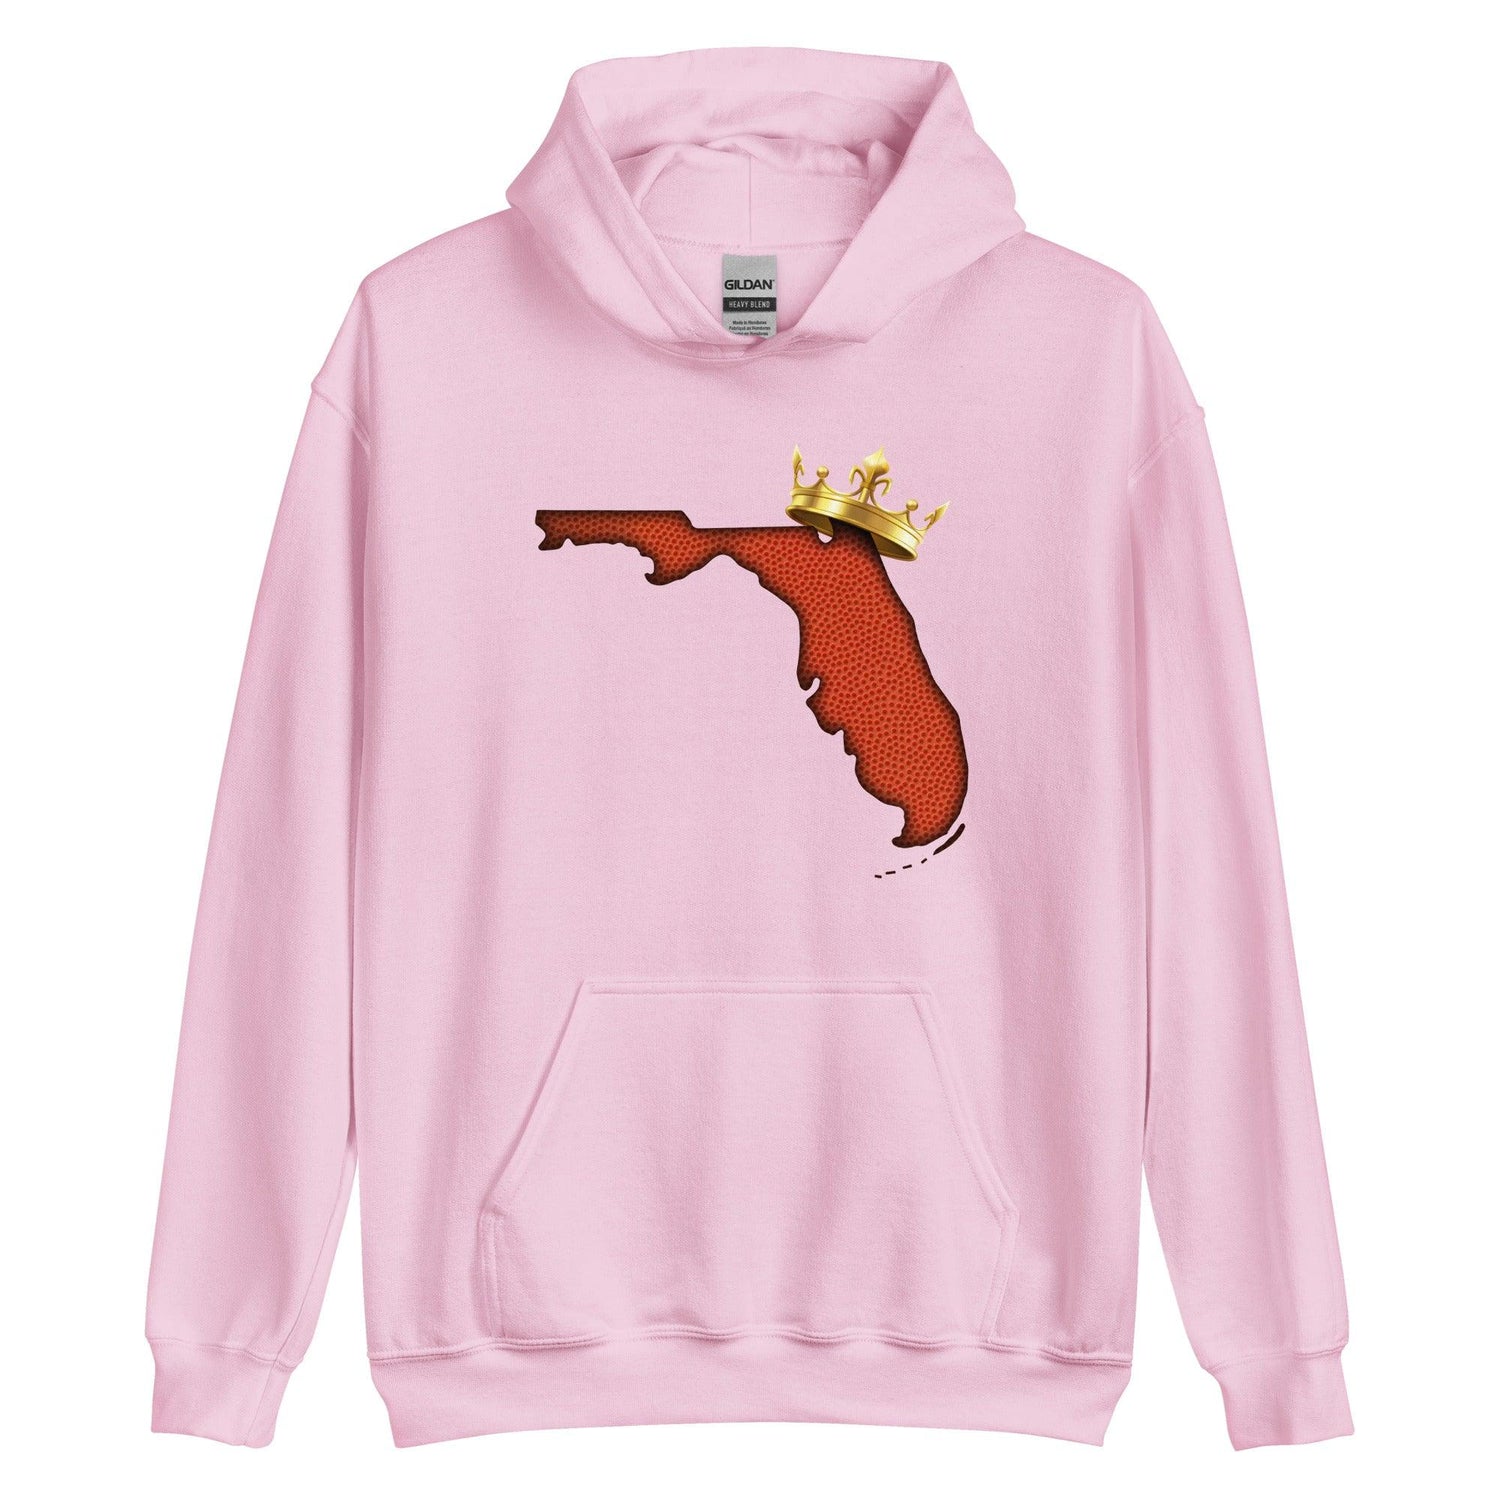 King of South Florida Hoodie - Fan Arch